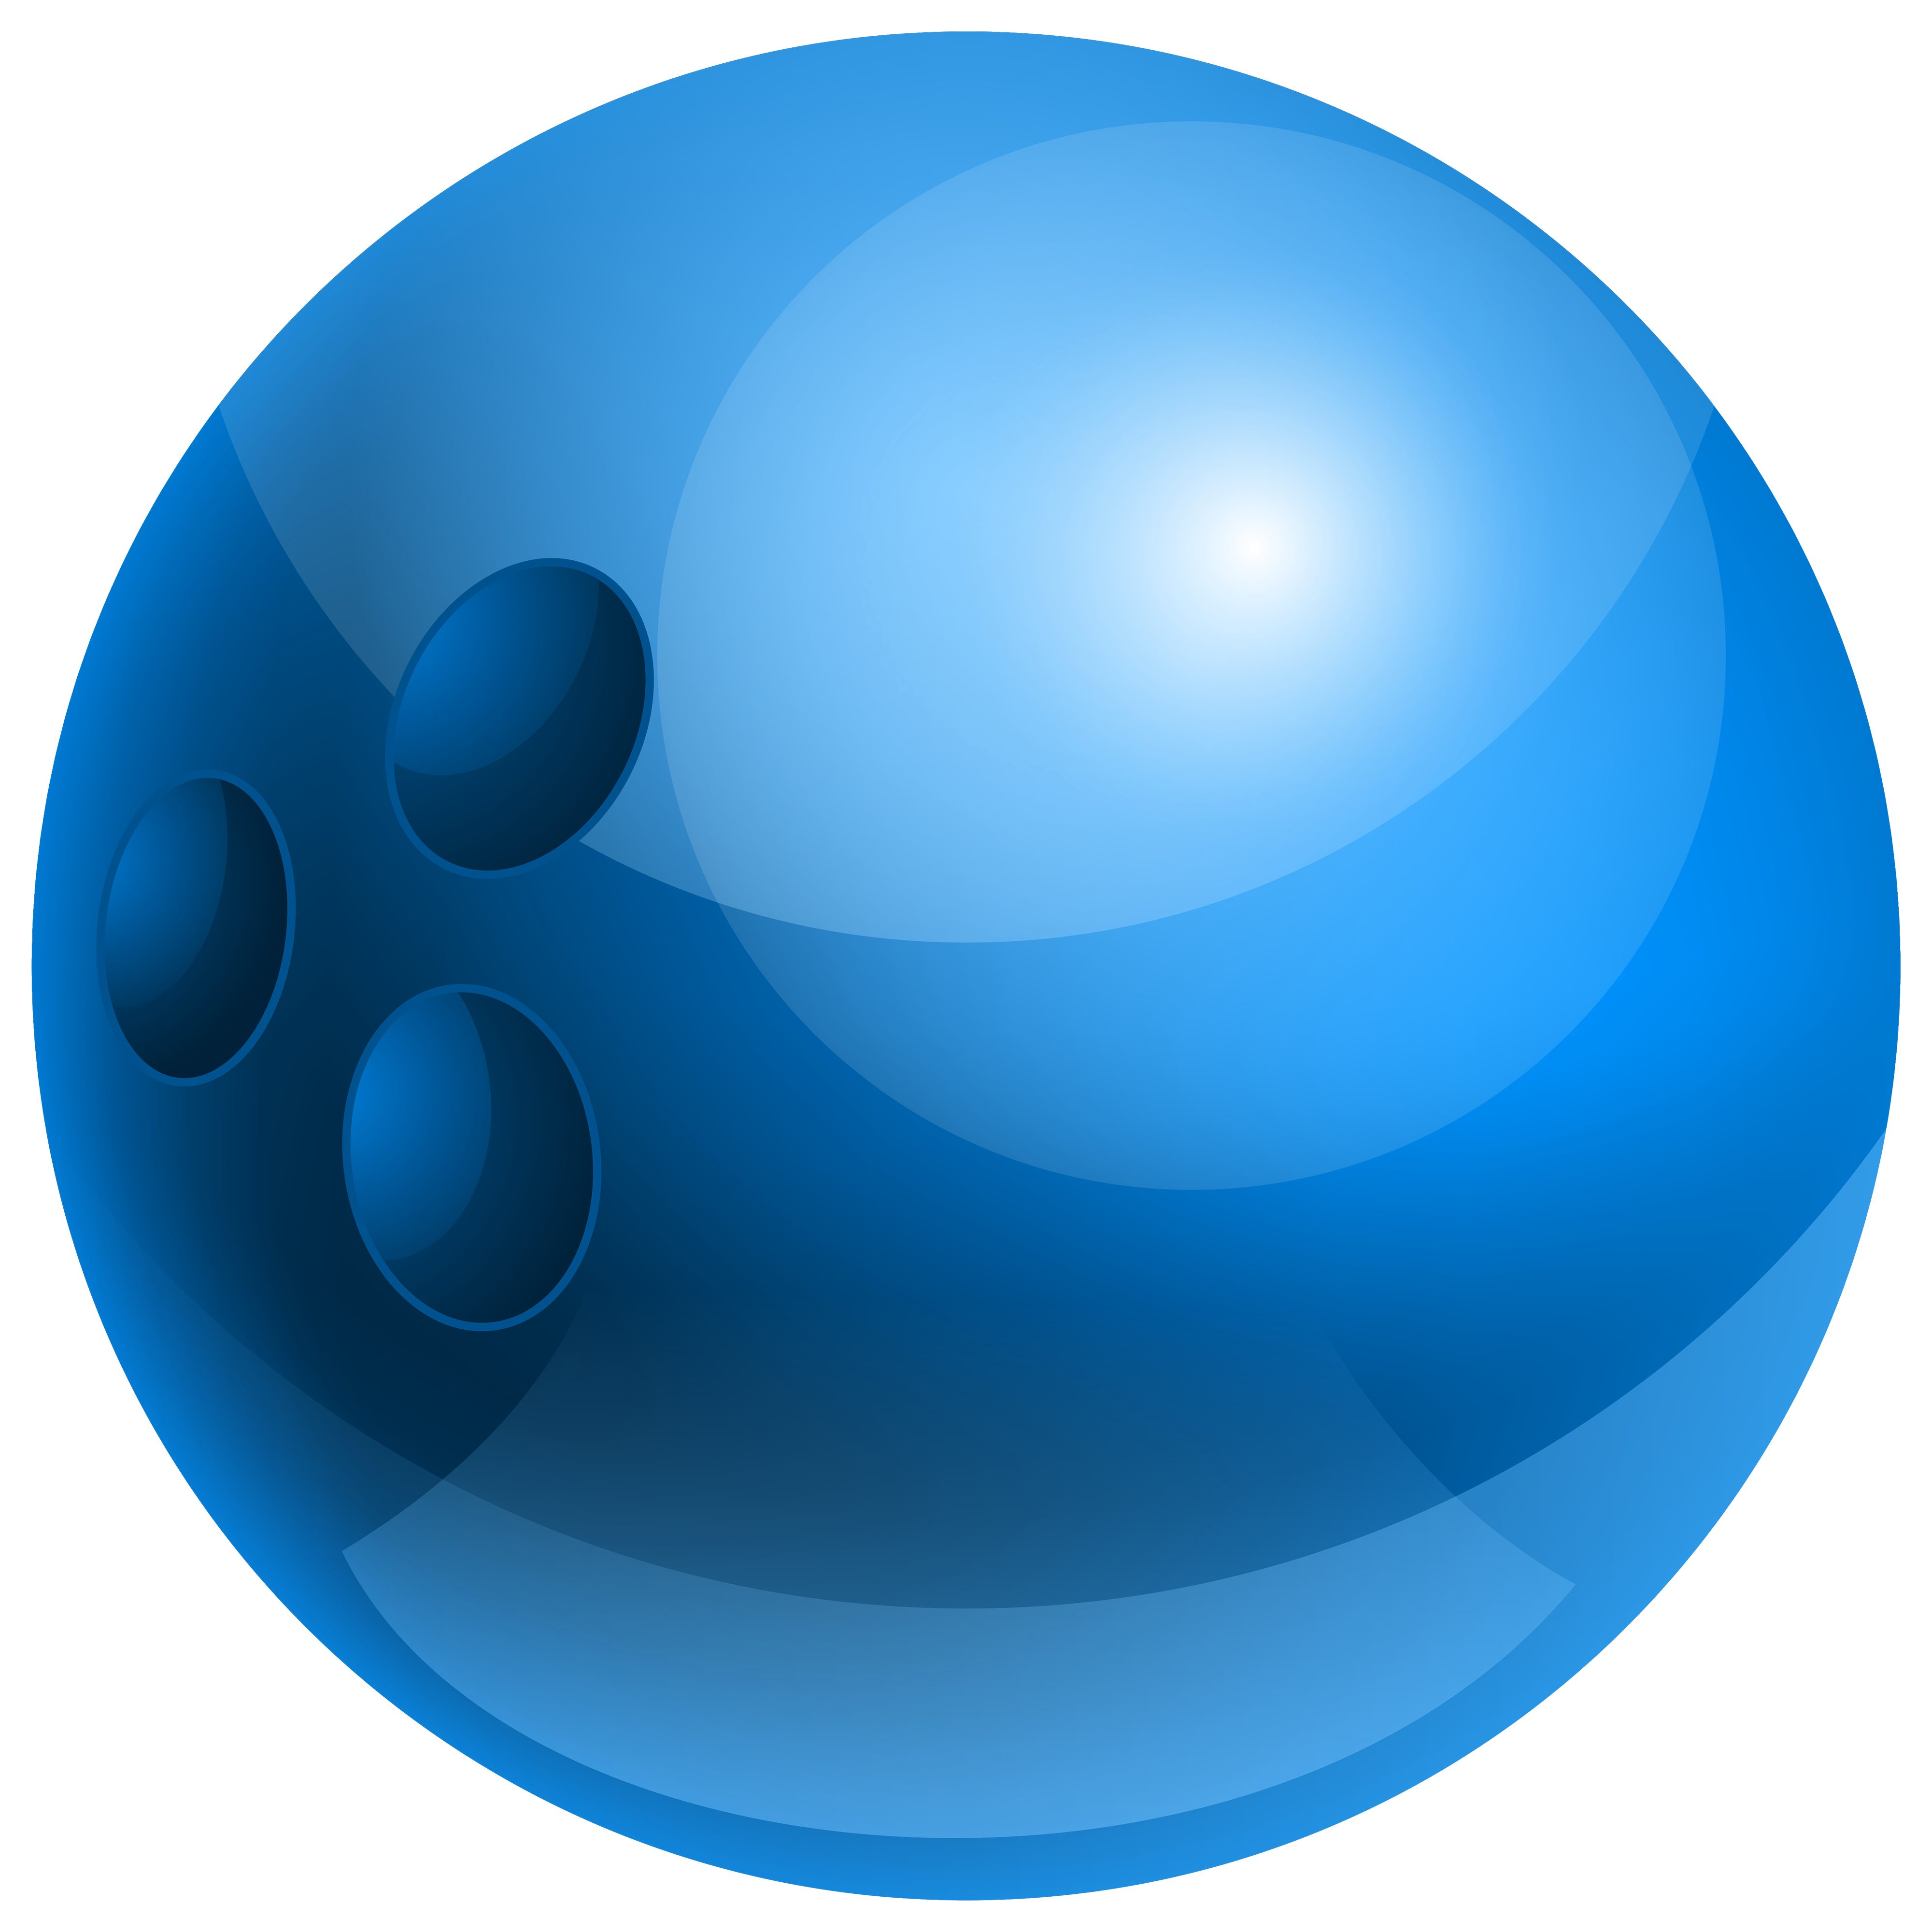 Clipart ball sphere, Clipart ball sphere Transparent FREE for download